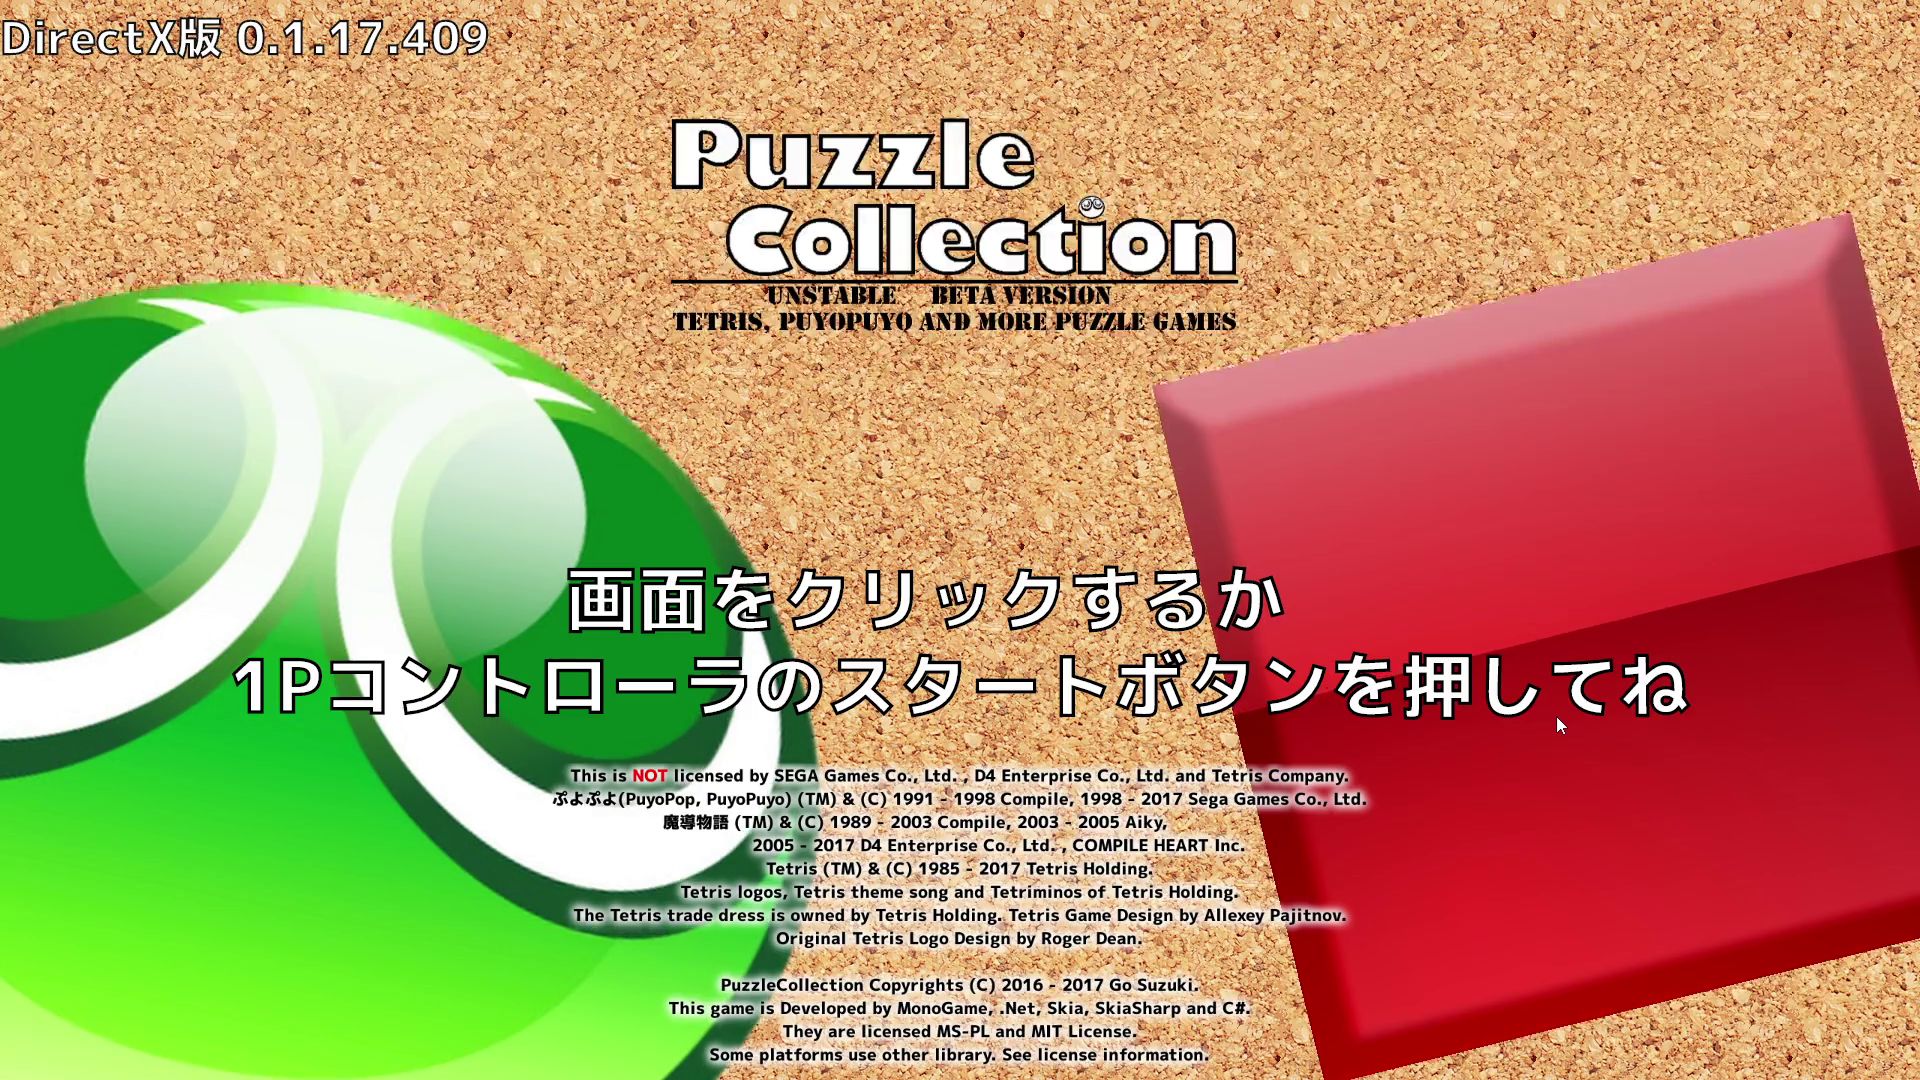 Title of PuzzleCollection 0.1.17.409